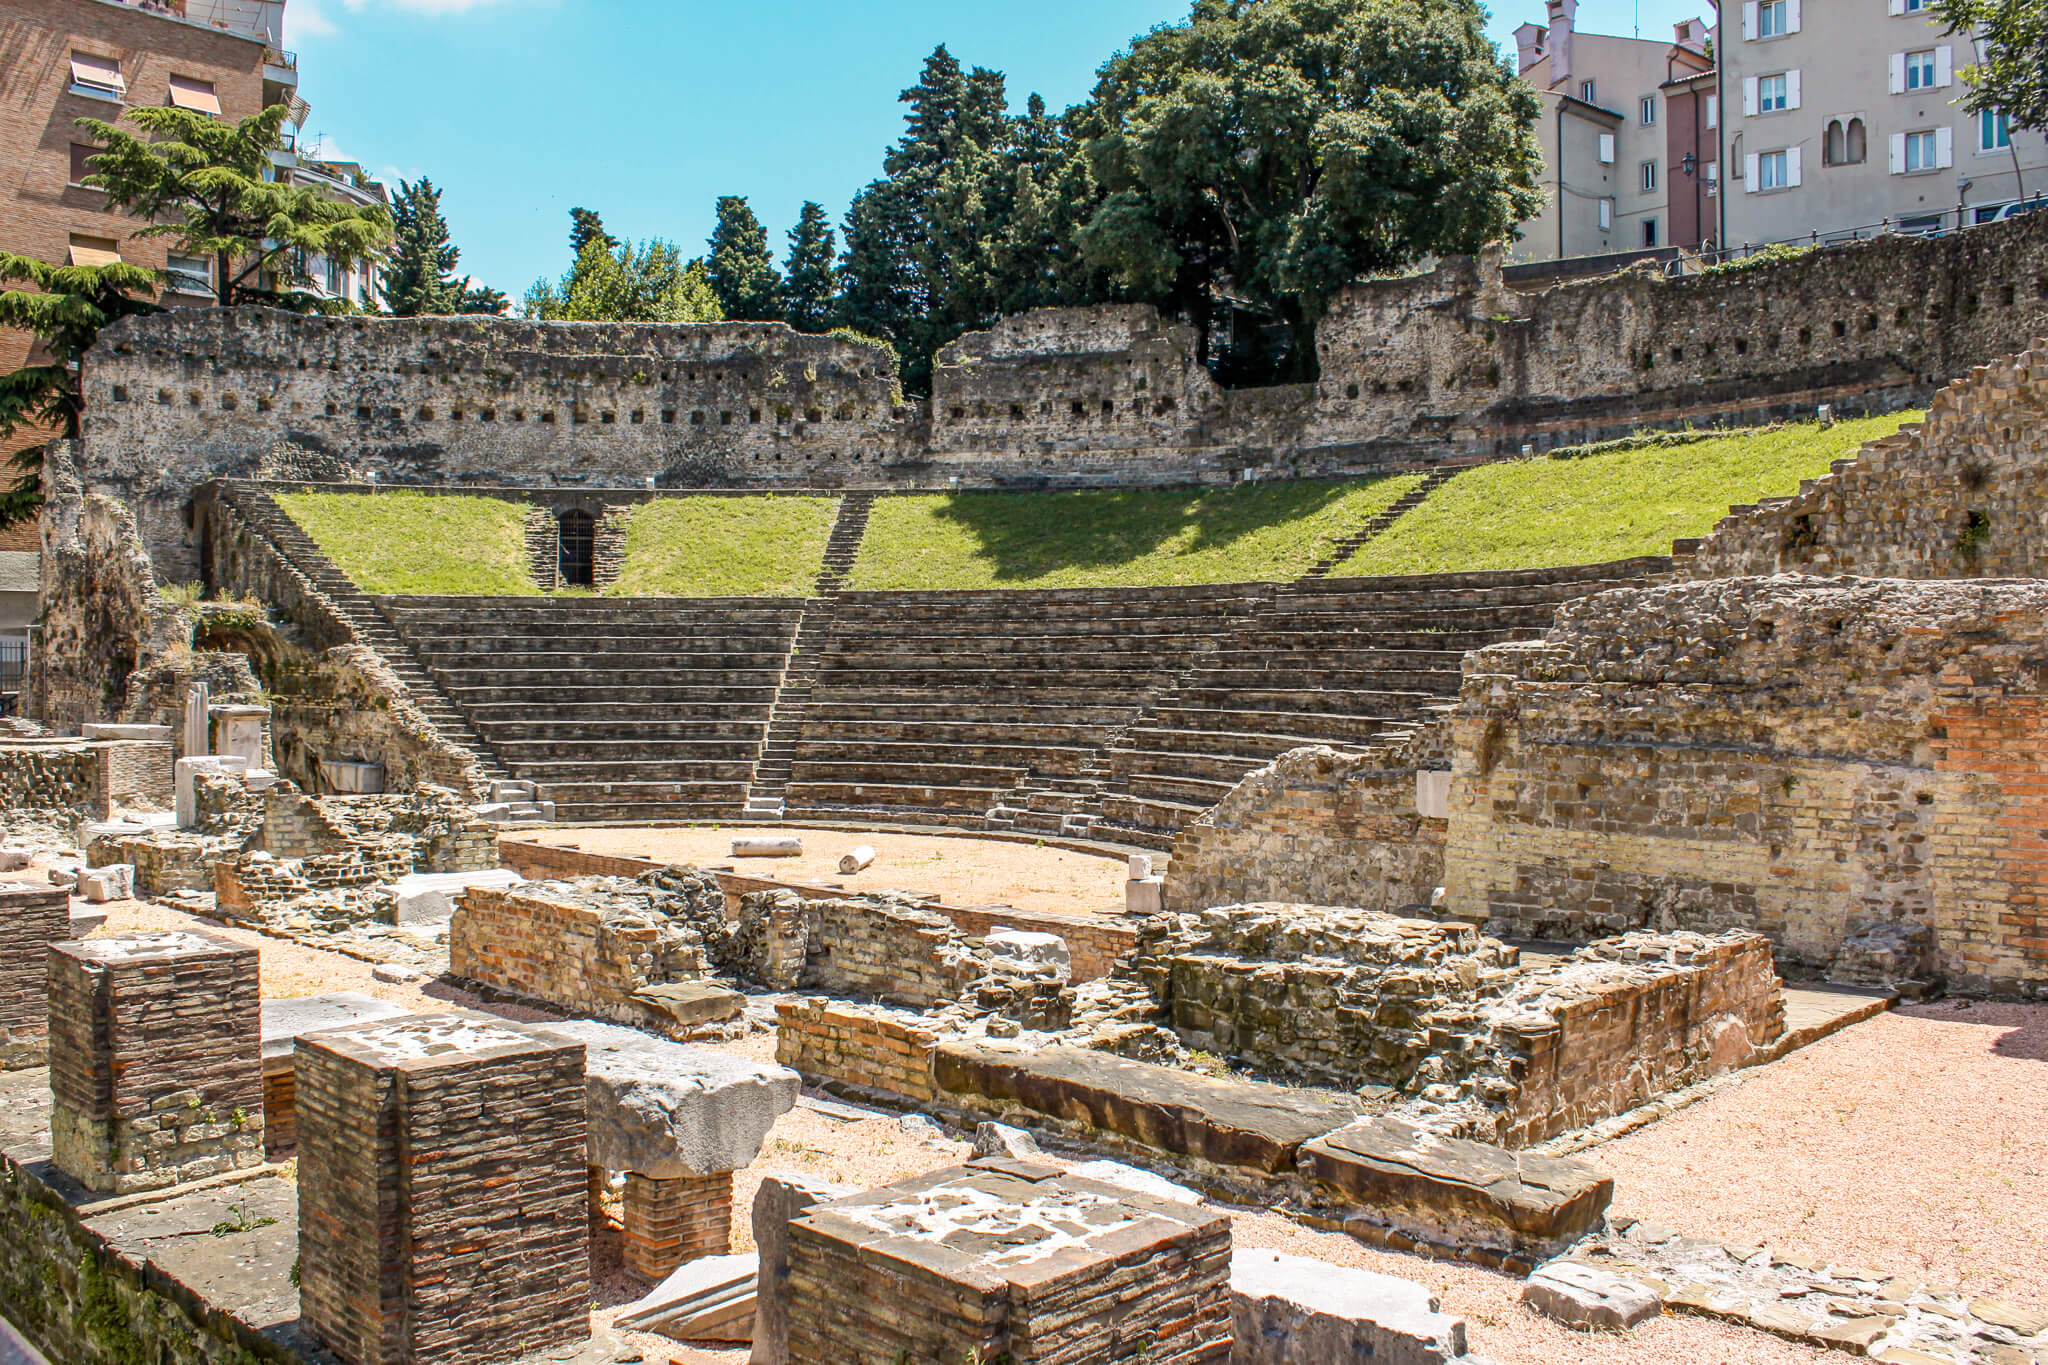 Ruins of the Roman theatre in Trieste, Italy